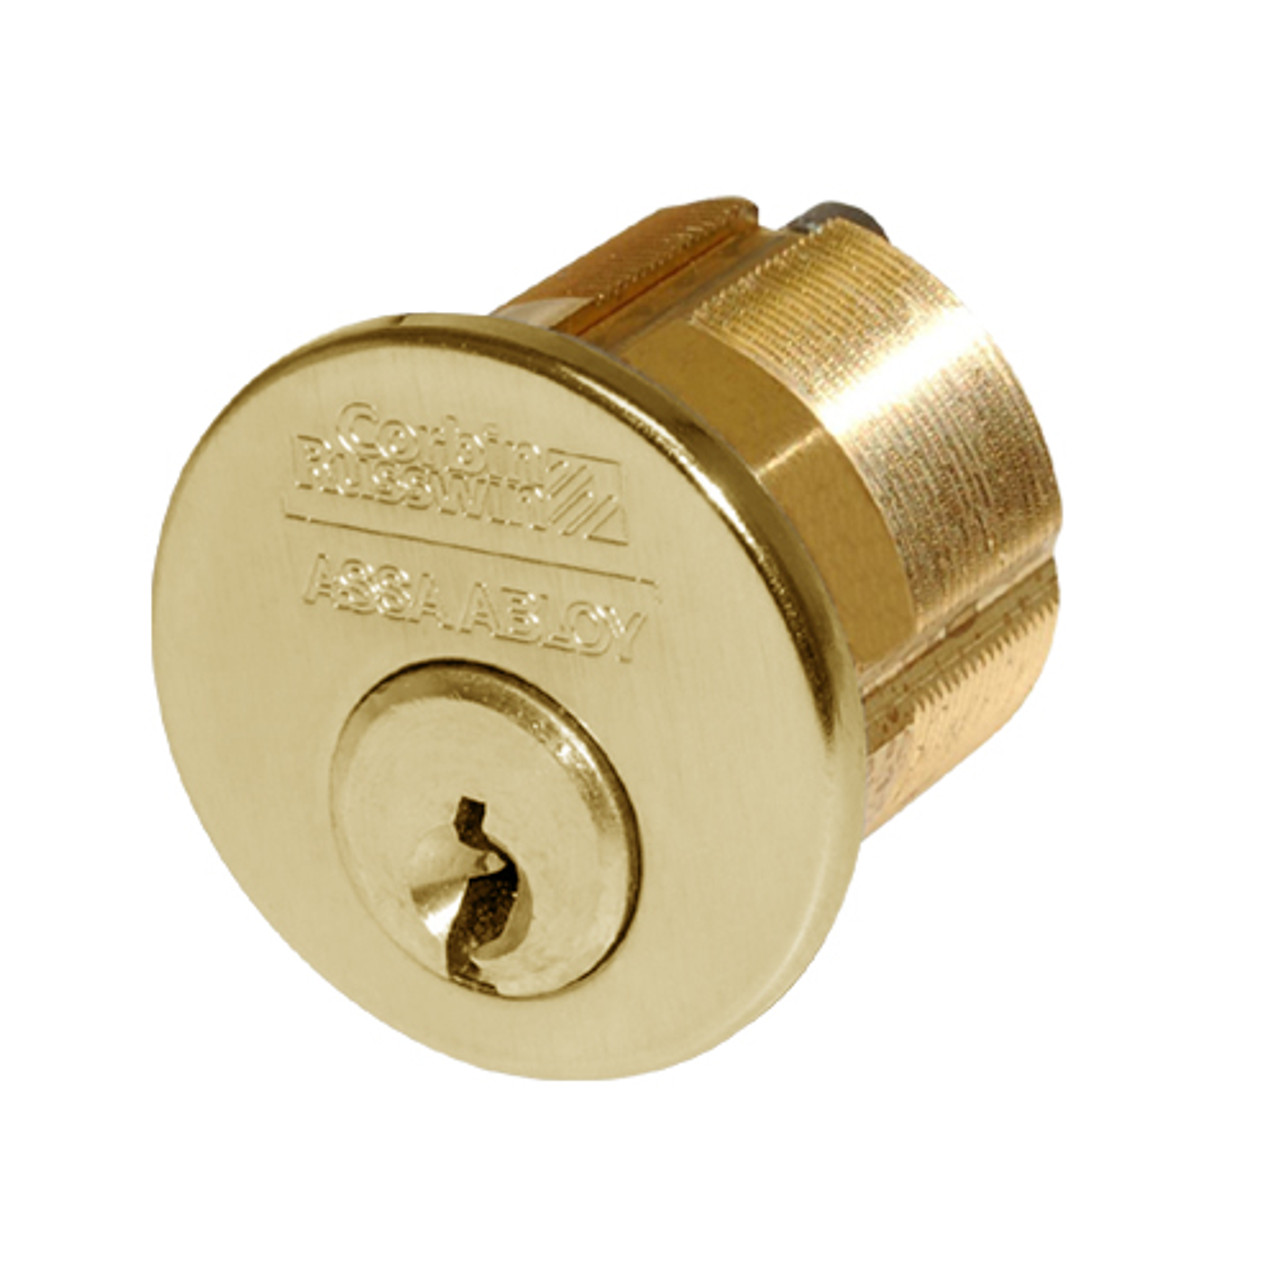 CR1000-114-A04-6-D1-605 Corbin Conventional Mortise Cylinder for Mortise Lock and DL3000 Deadlocks with DL4000 Deadlock Cam in Bright Brass Finish